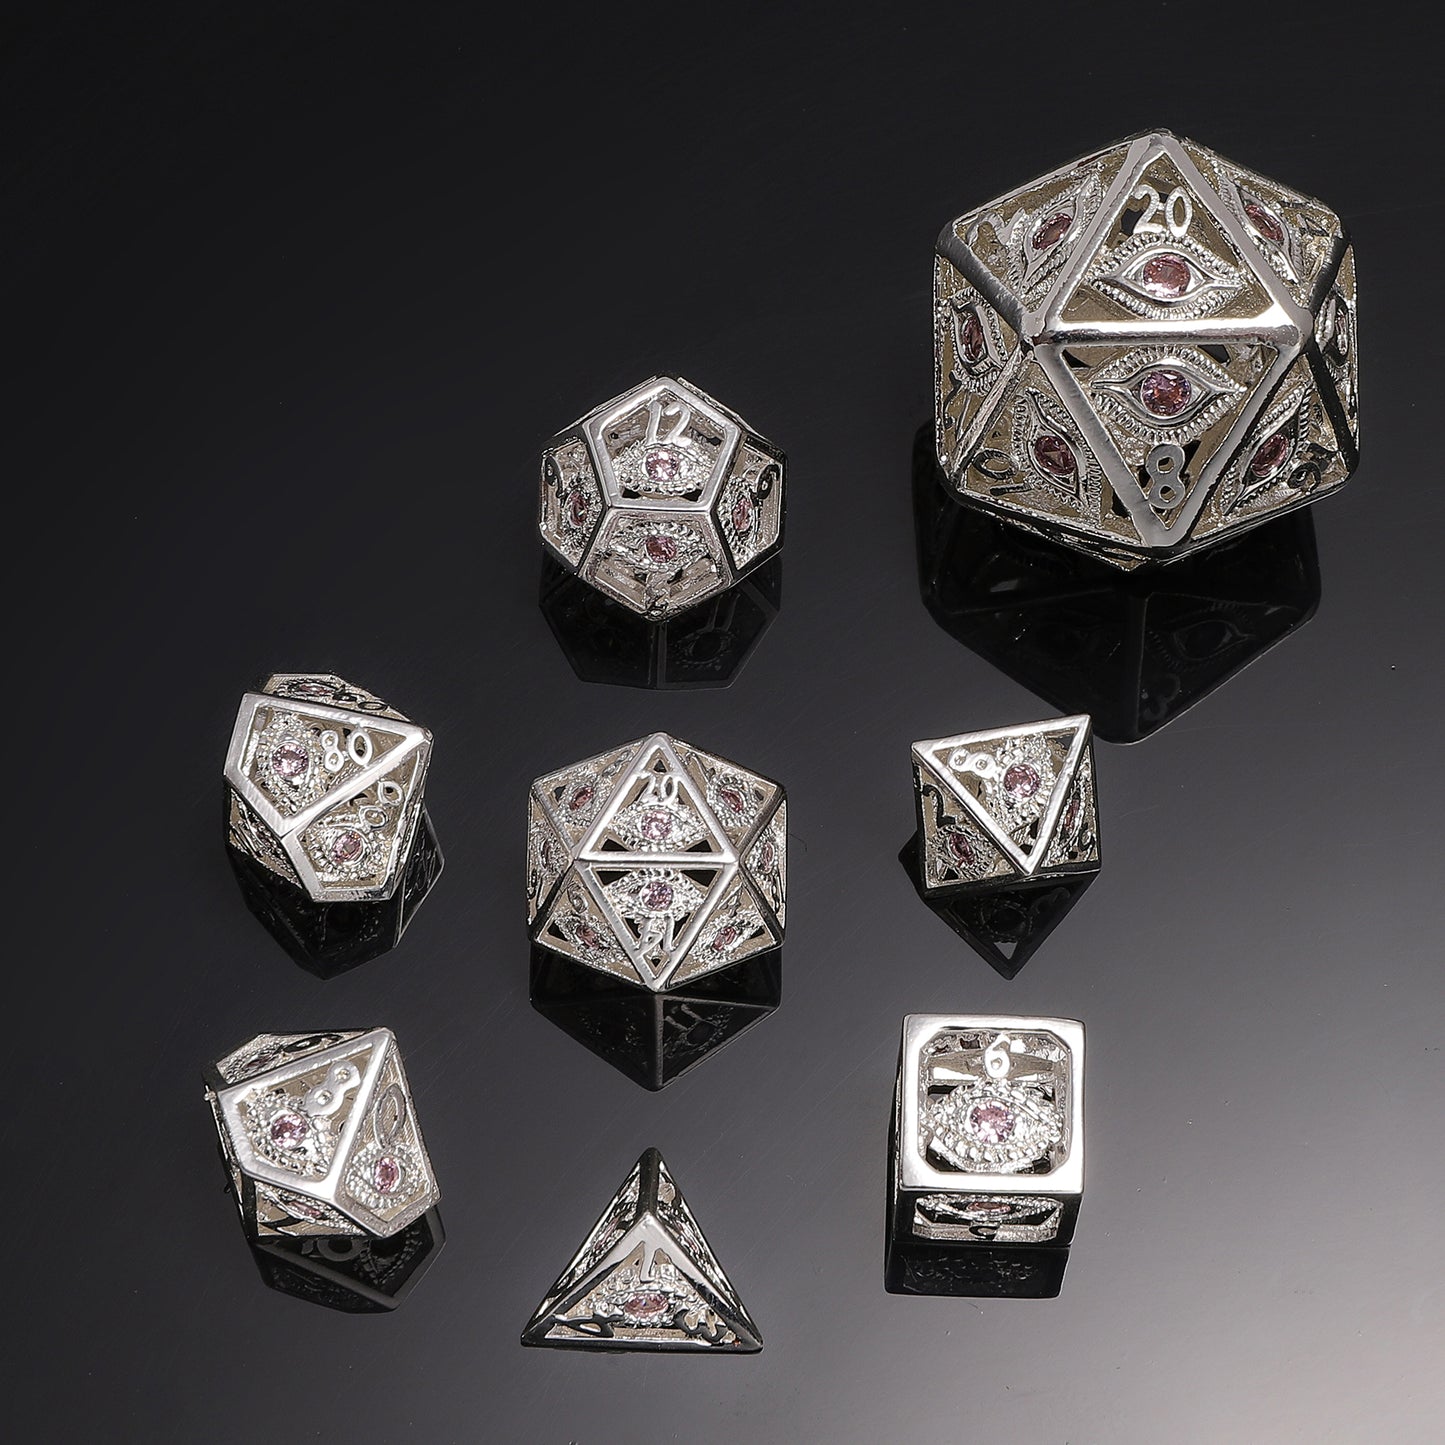 Hollow 10mm mini Dragon's Eye dice set-Shiny Silver with Pink Gems